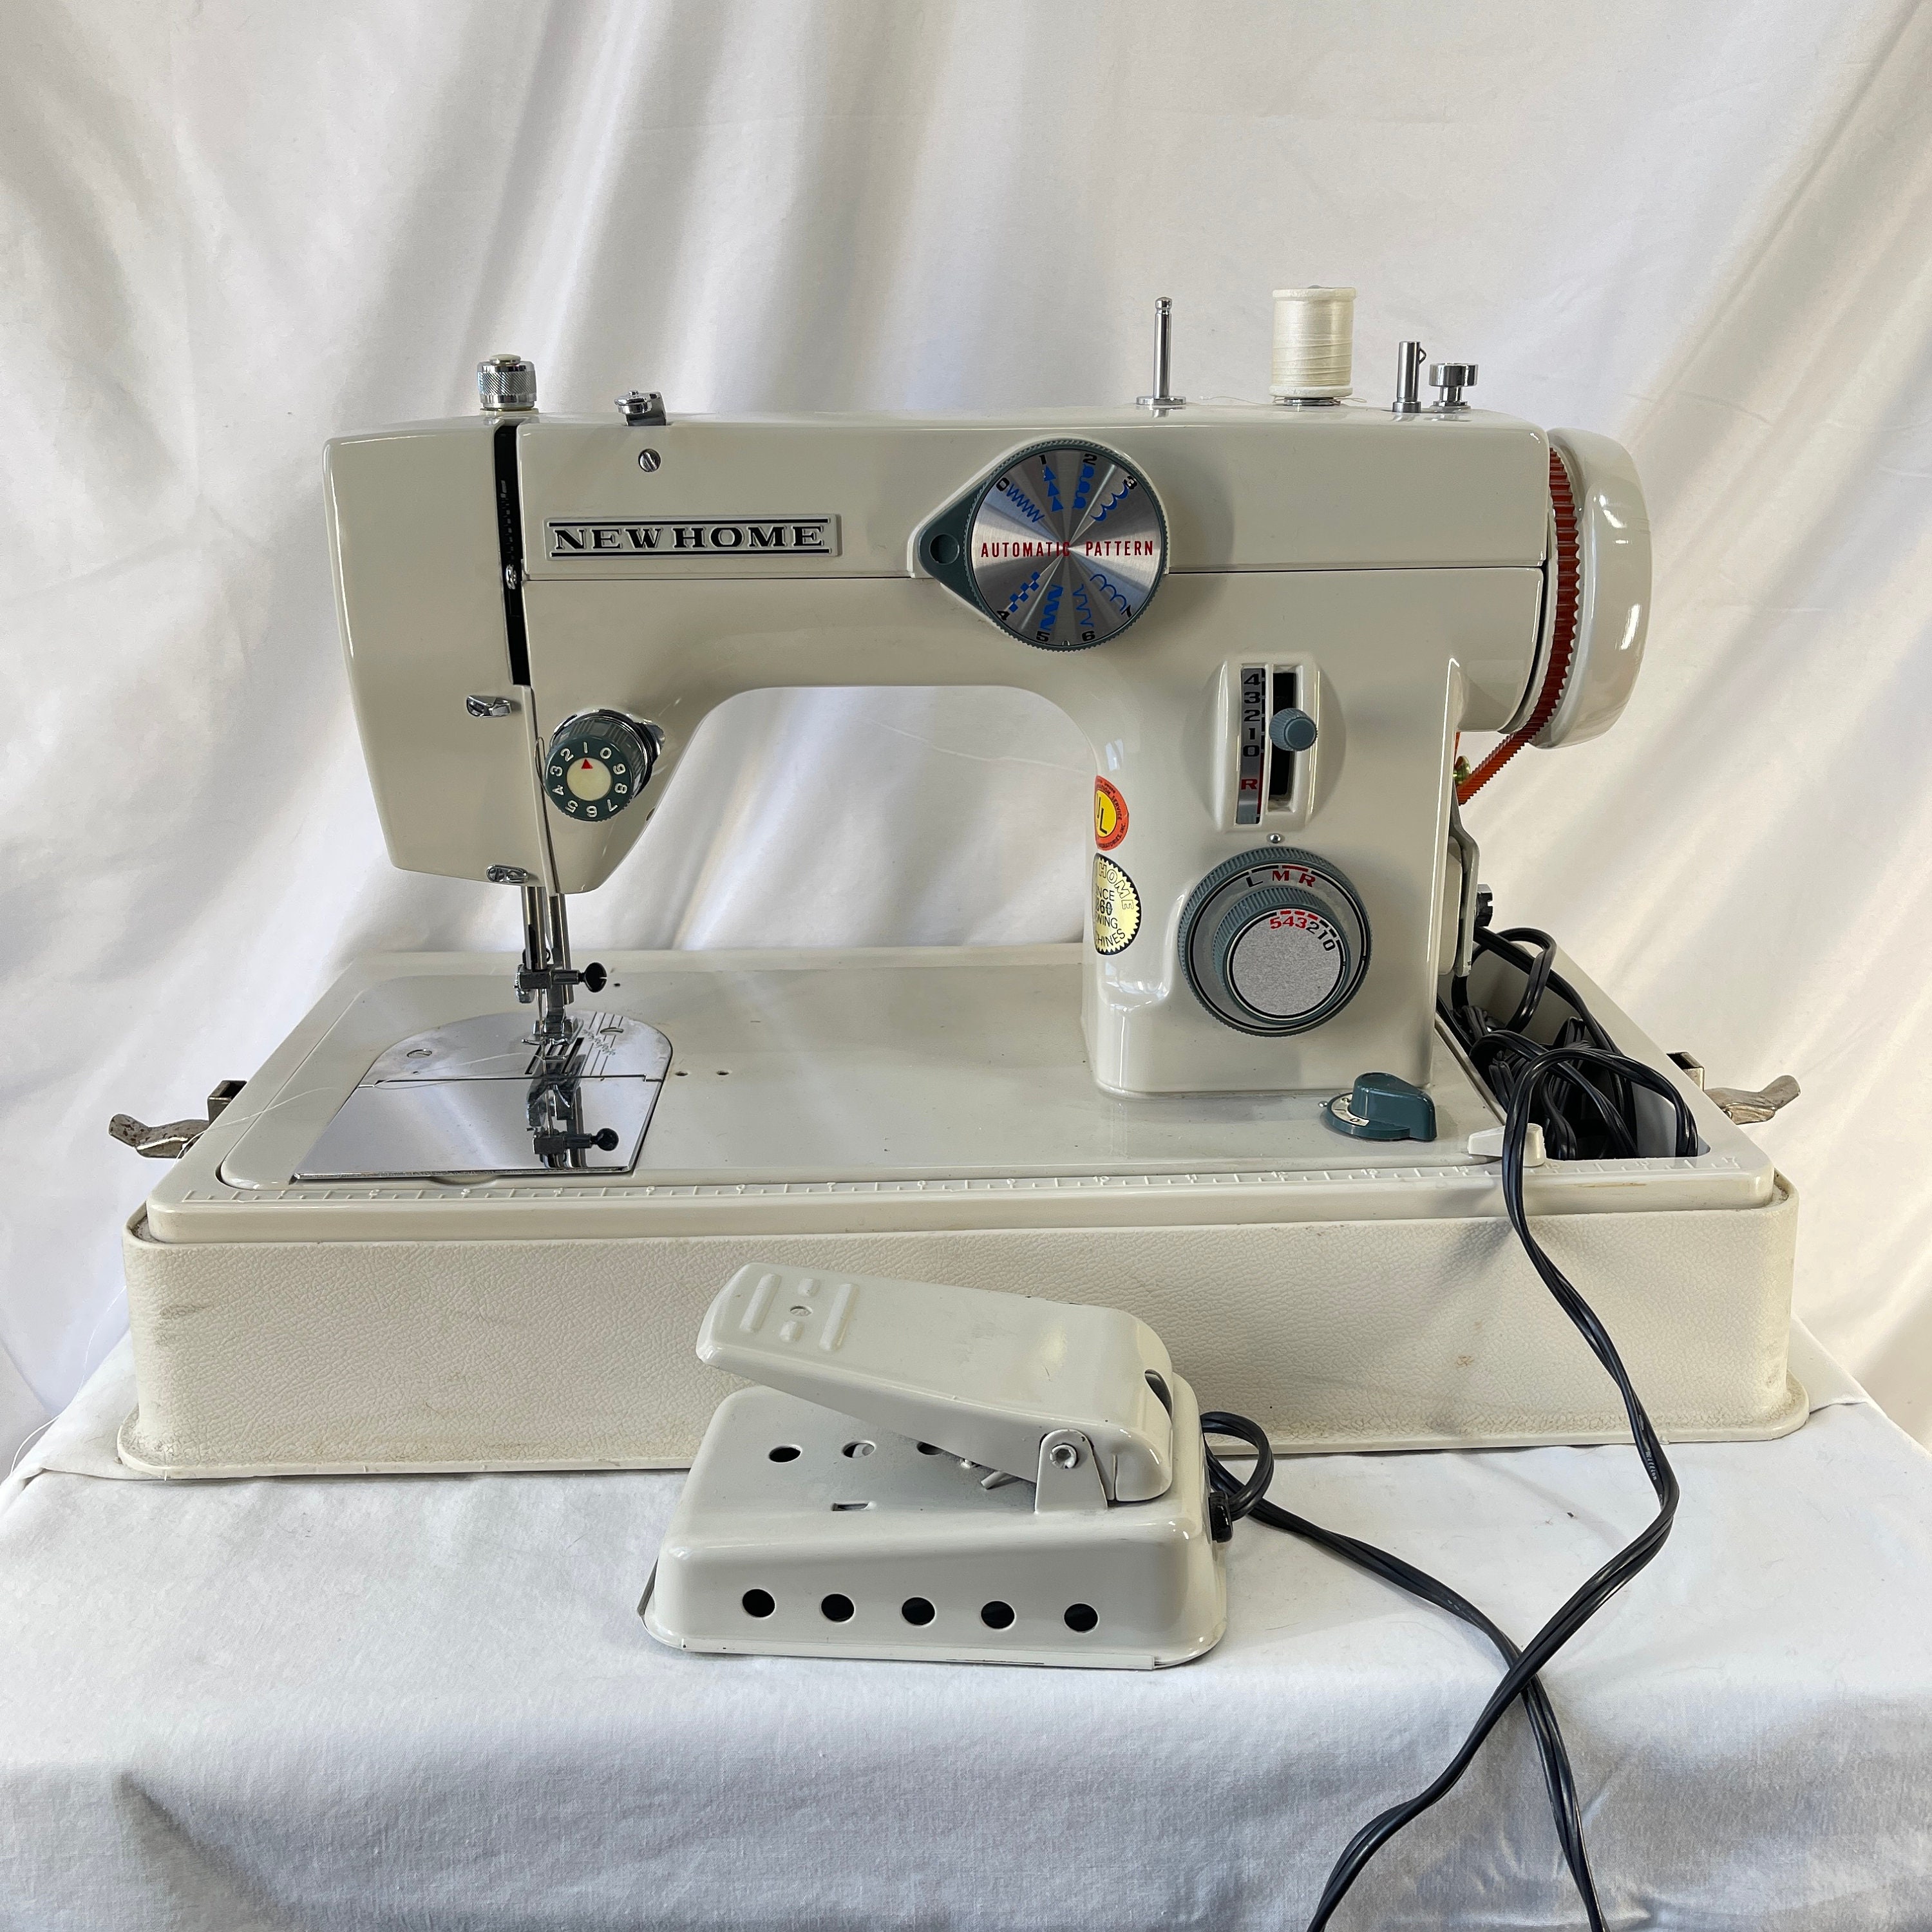 Brother 5300 Universal Sewing Machine Carrying Case  Sewing machine,  Viking sewing machine, Brother sewing machines